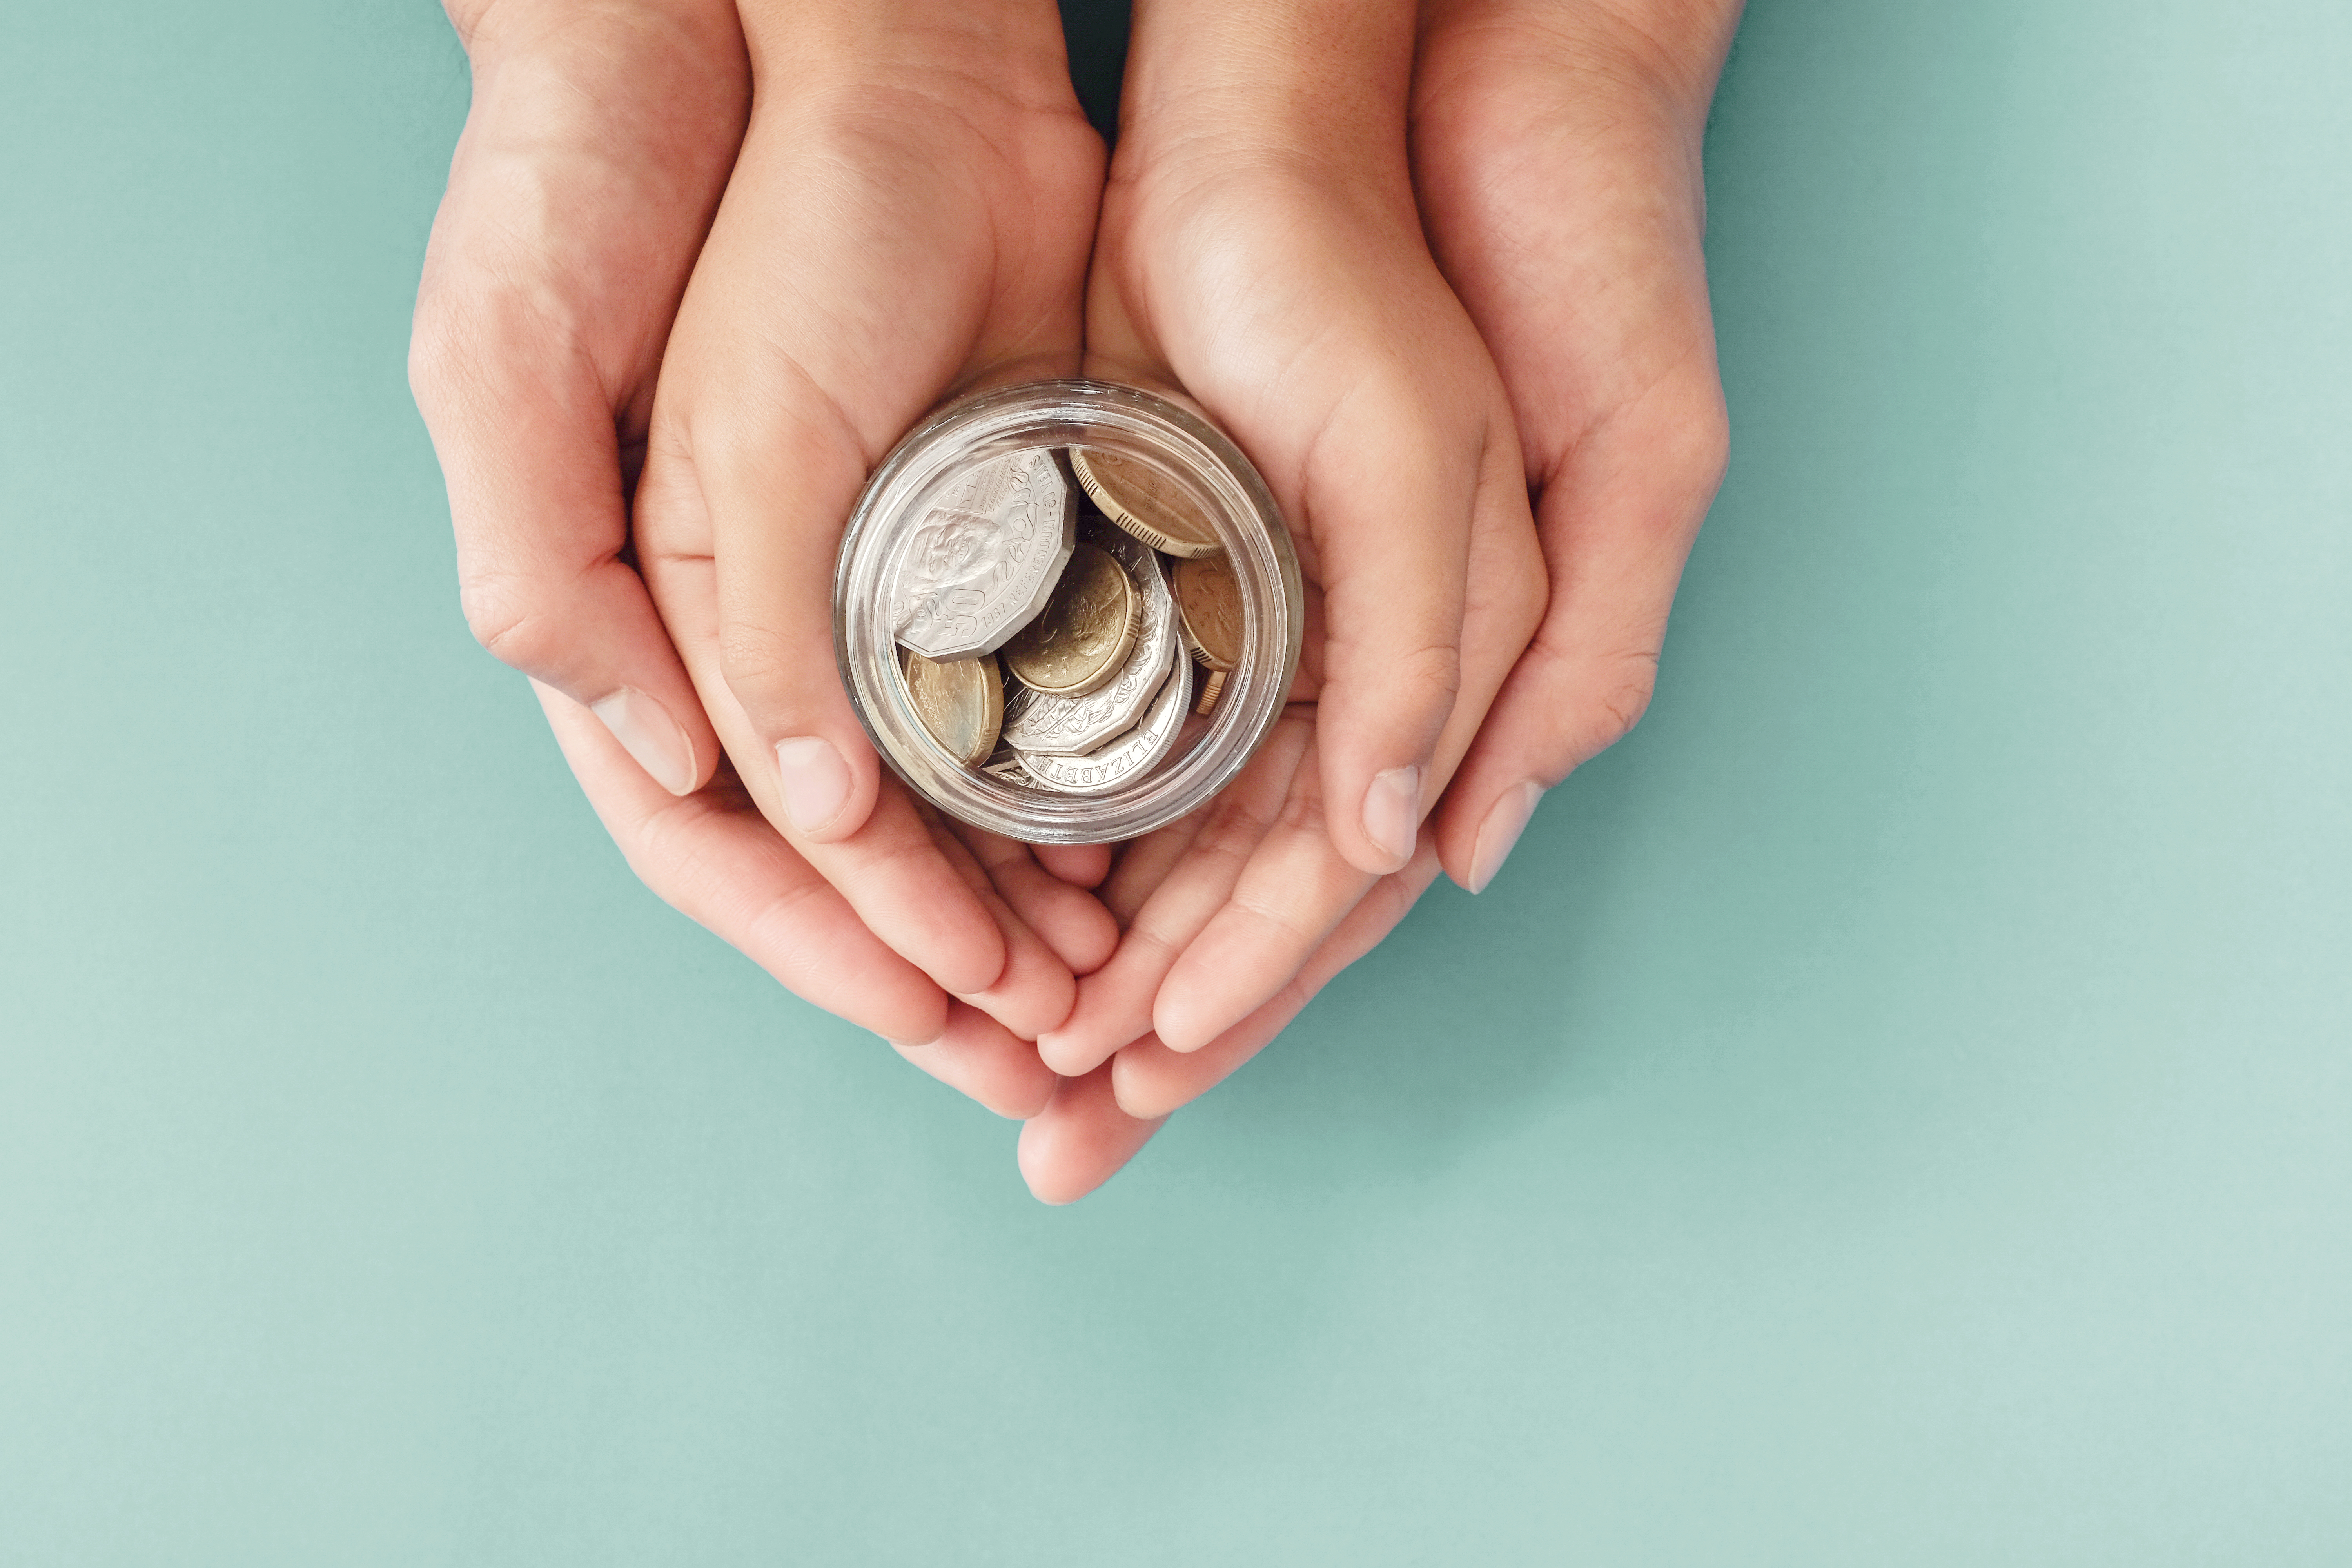 child-and-parent-hands-holding-money-jar-donation-saving-family-finance-plan-concept